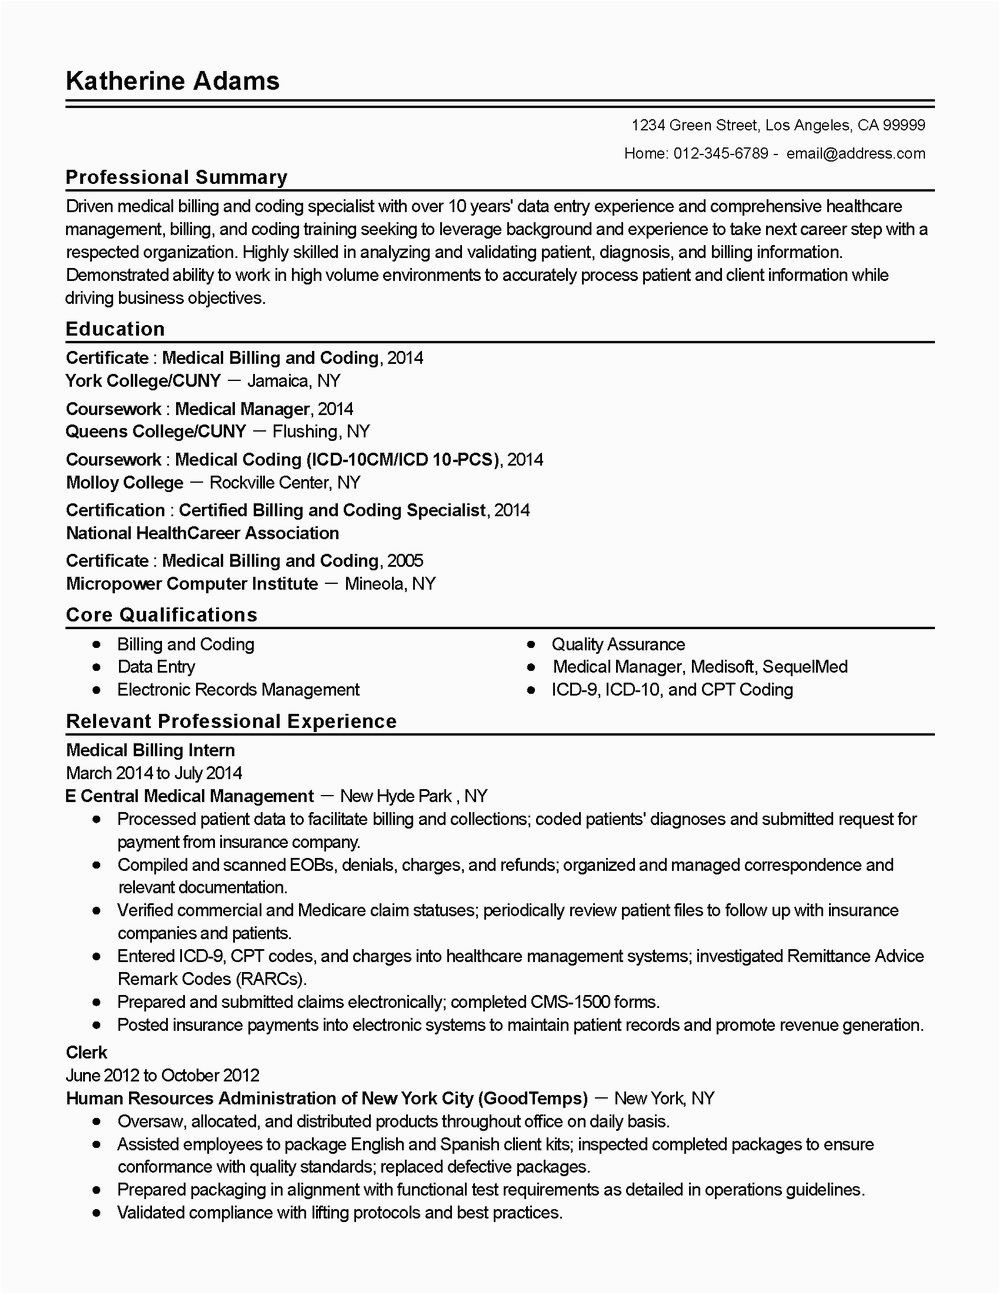 Sample Resume for Coding and Billing Resume for Medical Billing and Coding Specialist